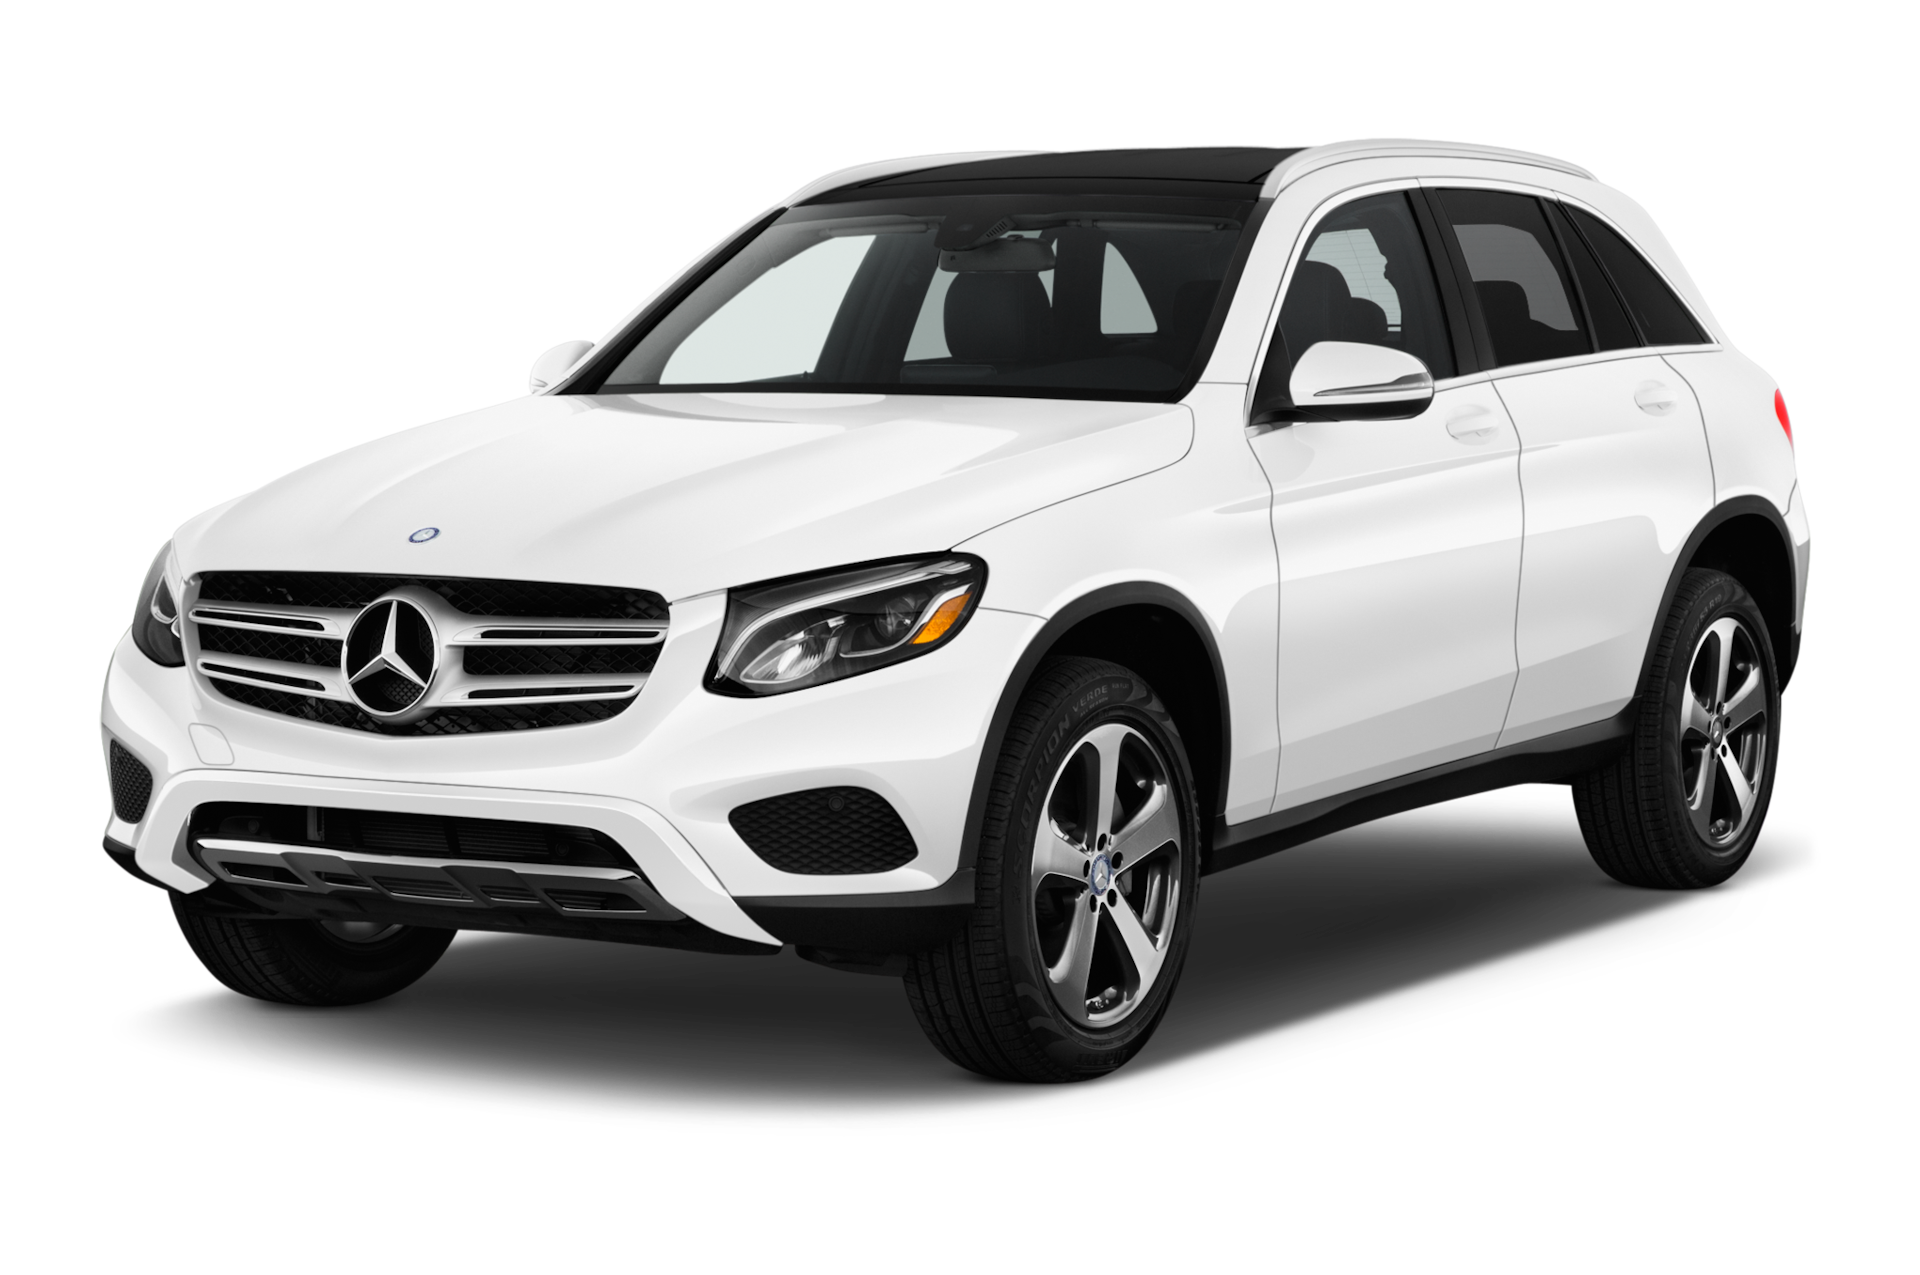 2018 Mercedes-Benz GLC-Class Prices, Reviews, and Photos - MotorTrend